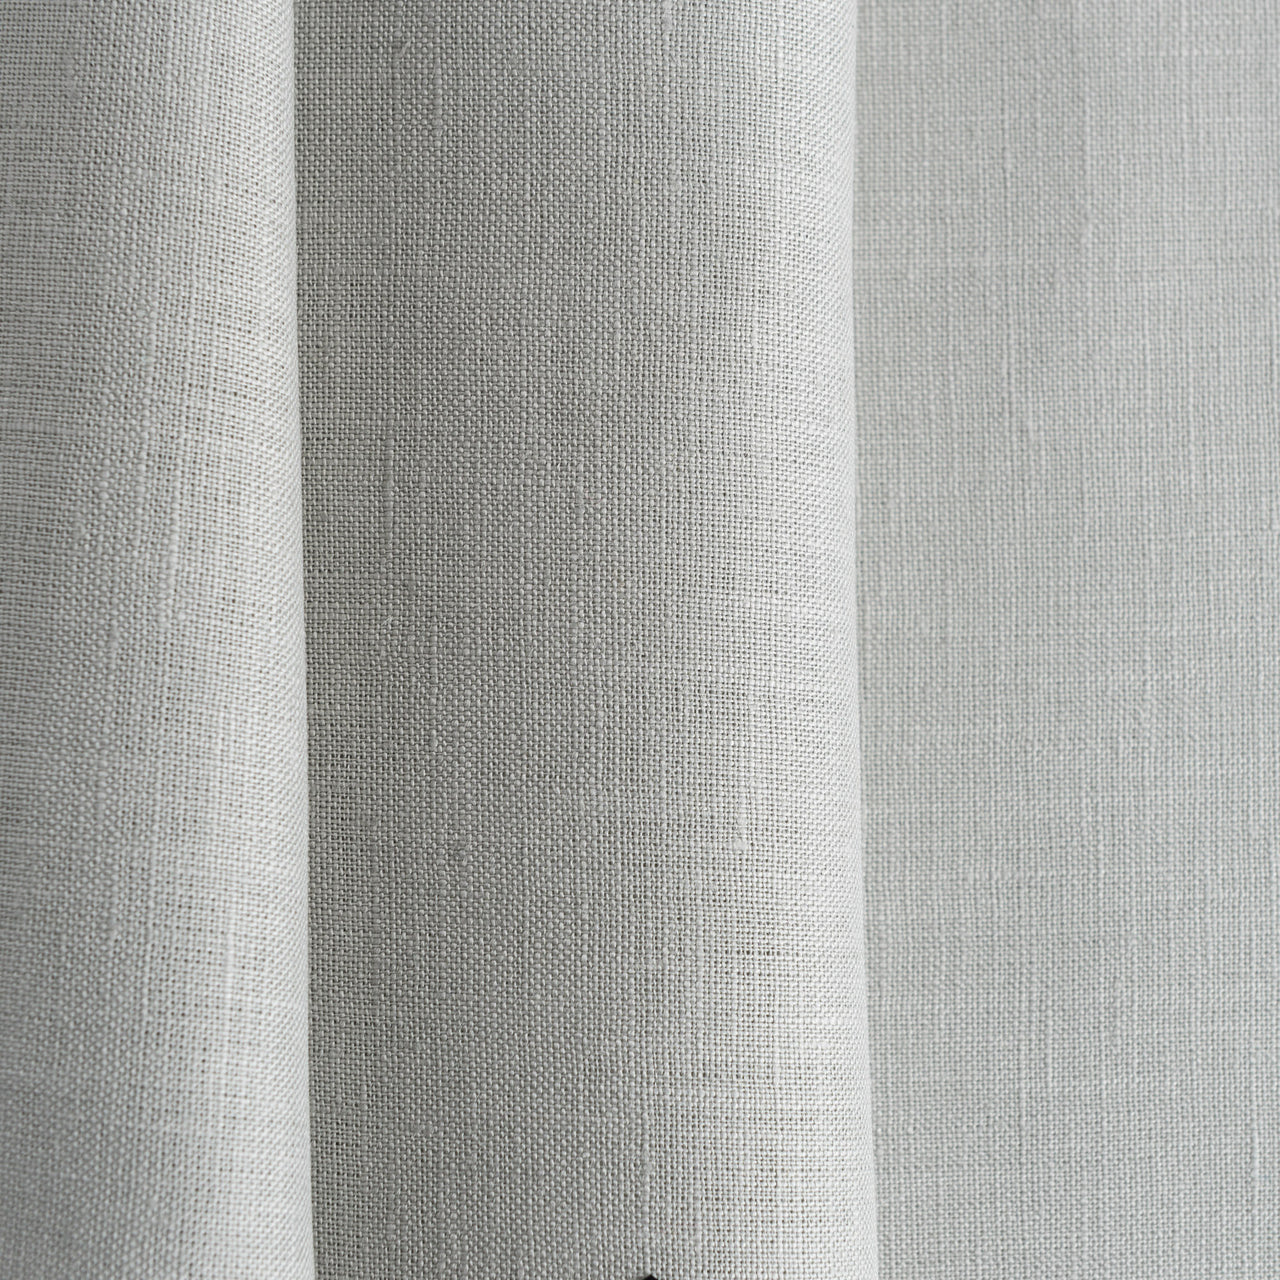 Double Pinch Pleat Grey Linen Curtain with Cotton Lining - Custom Sizes & Colours, Color: Stone Grey